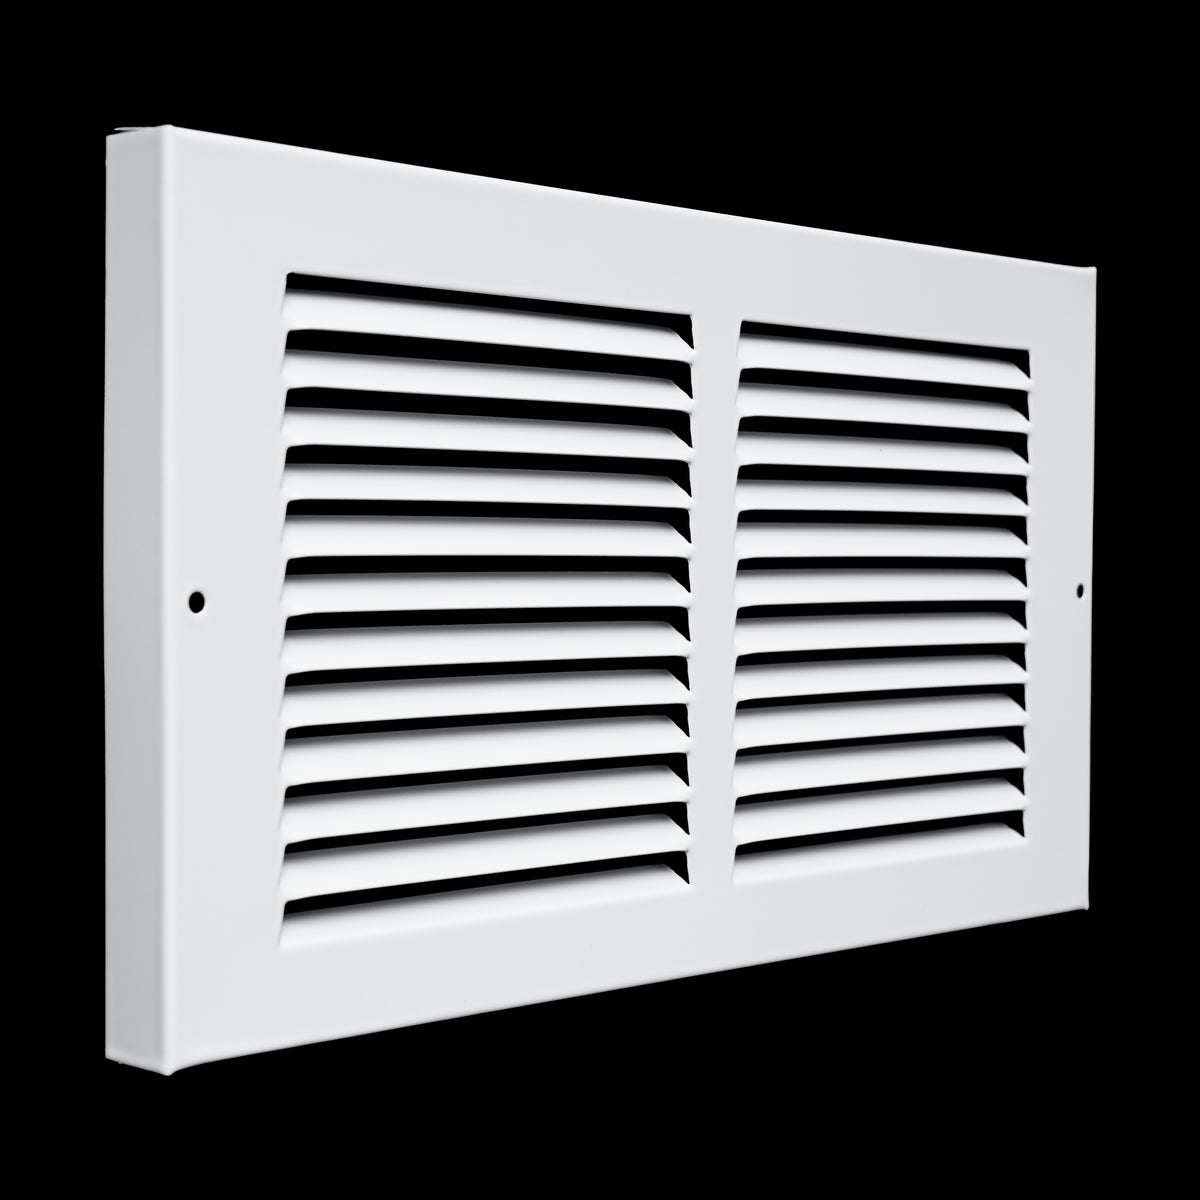 airgrilles 12"w x 6"h baseboard return air grille  -  vent cover grill  -  7/8" margin turnback to fit baseboard  -  white  -  outer dimensions: 13.75"w x 7.75"h for 12x6 duct opening hnd-bra-wh-12x6  - 1